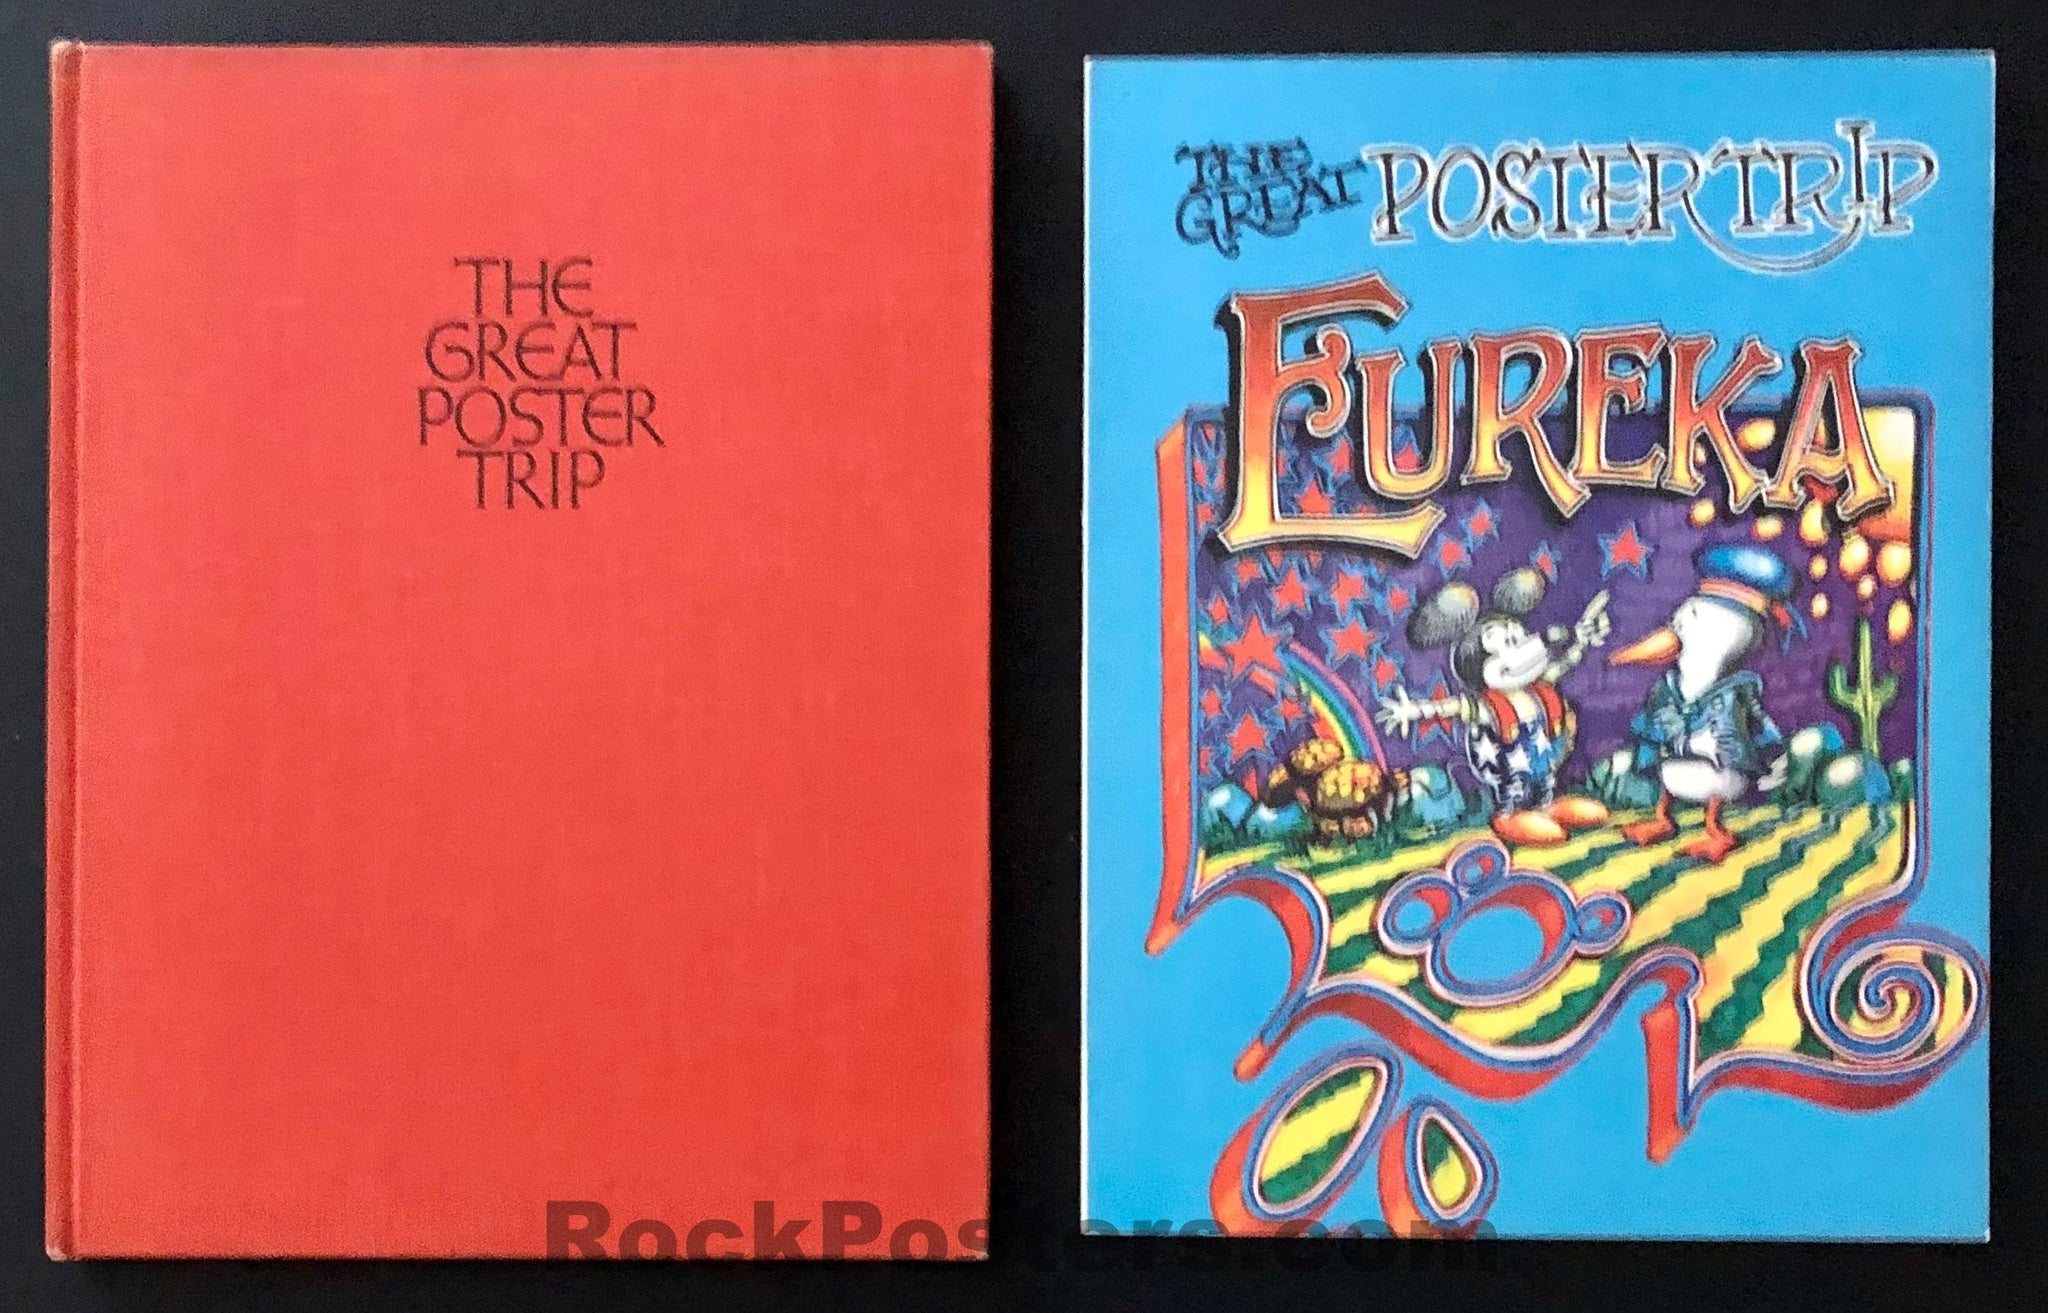 Auction - The Great Poster Trip - Art Eureka 1968 - Hardbound & Softbound Editions - Excellent